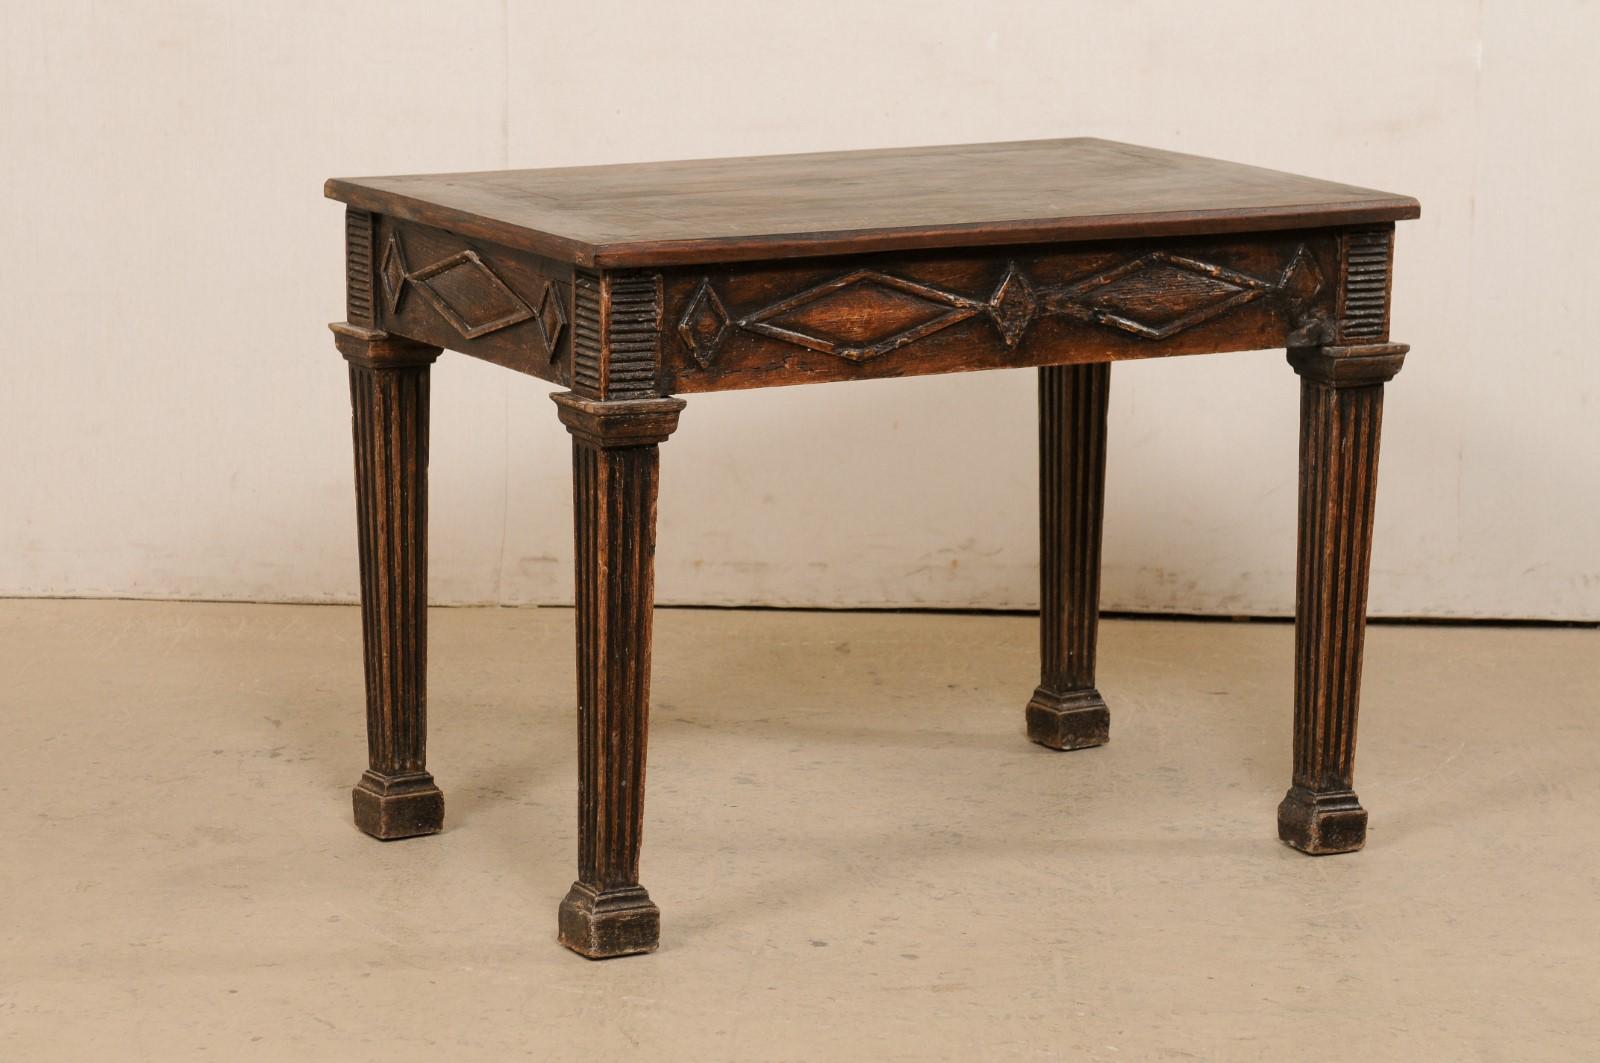 An Italian nicely carved occasional table from the 19th century. This antique table from Italy has a rectangular-shaped top with a large, but subtle diamond shape within its center, which rests above a skirt embellished with thick, raised